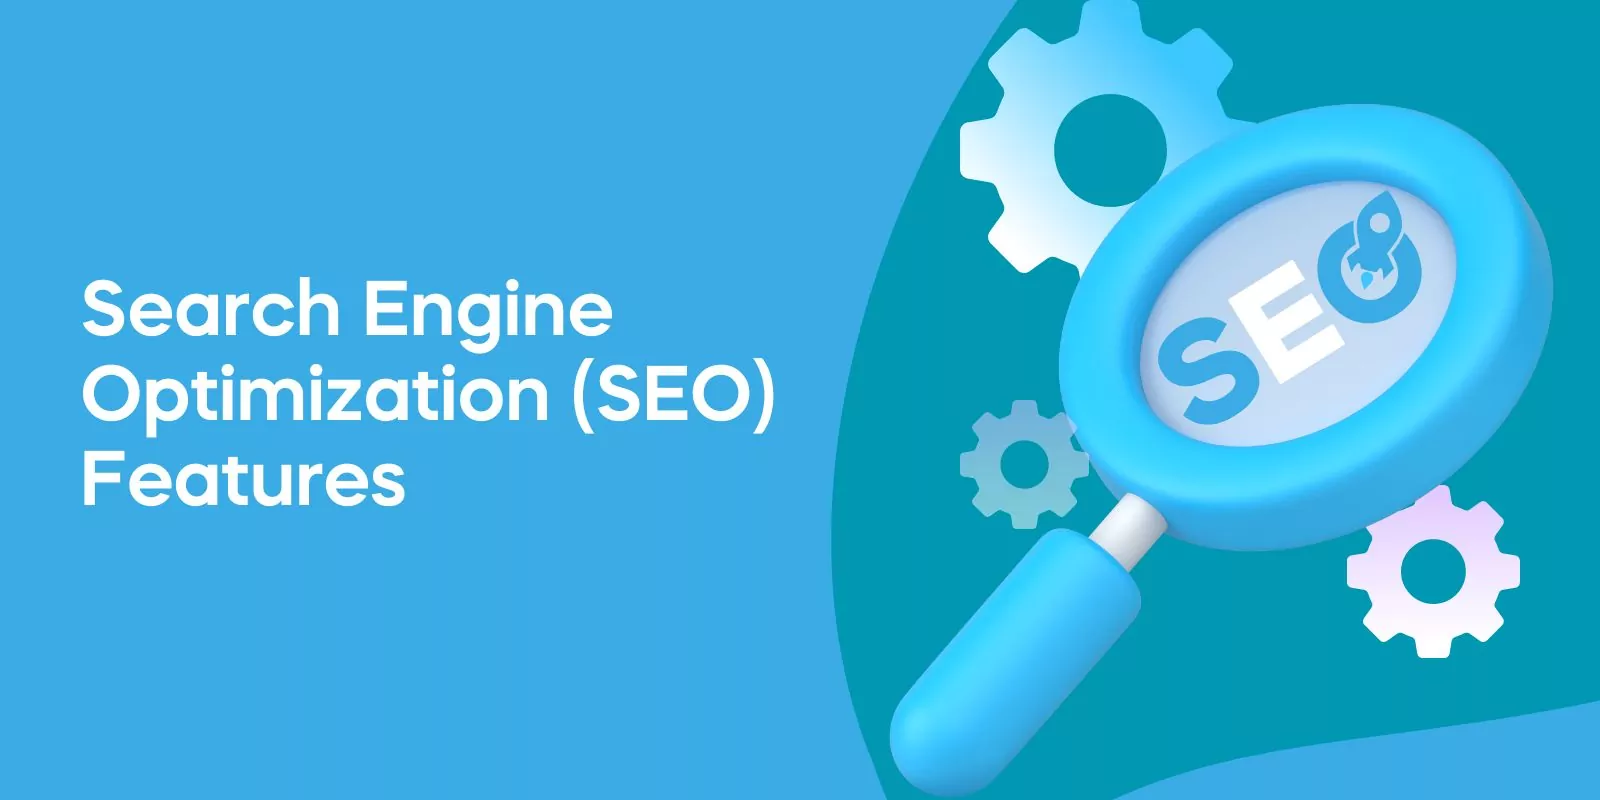 Search Engine Optimization (SEO) Features